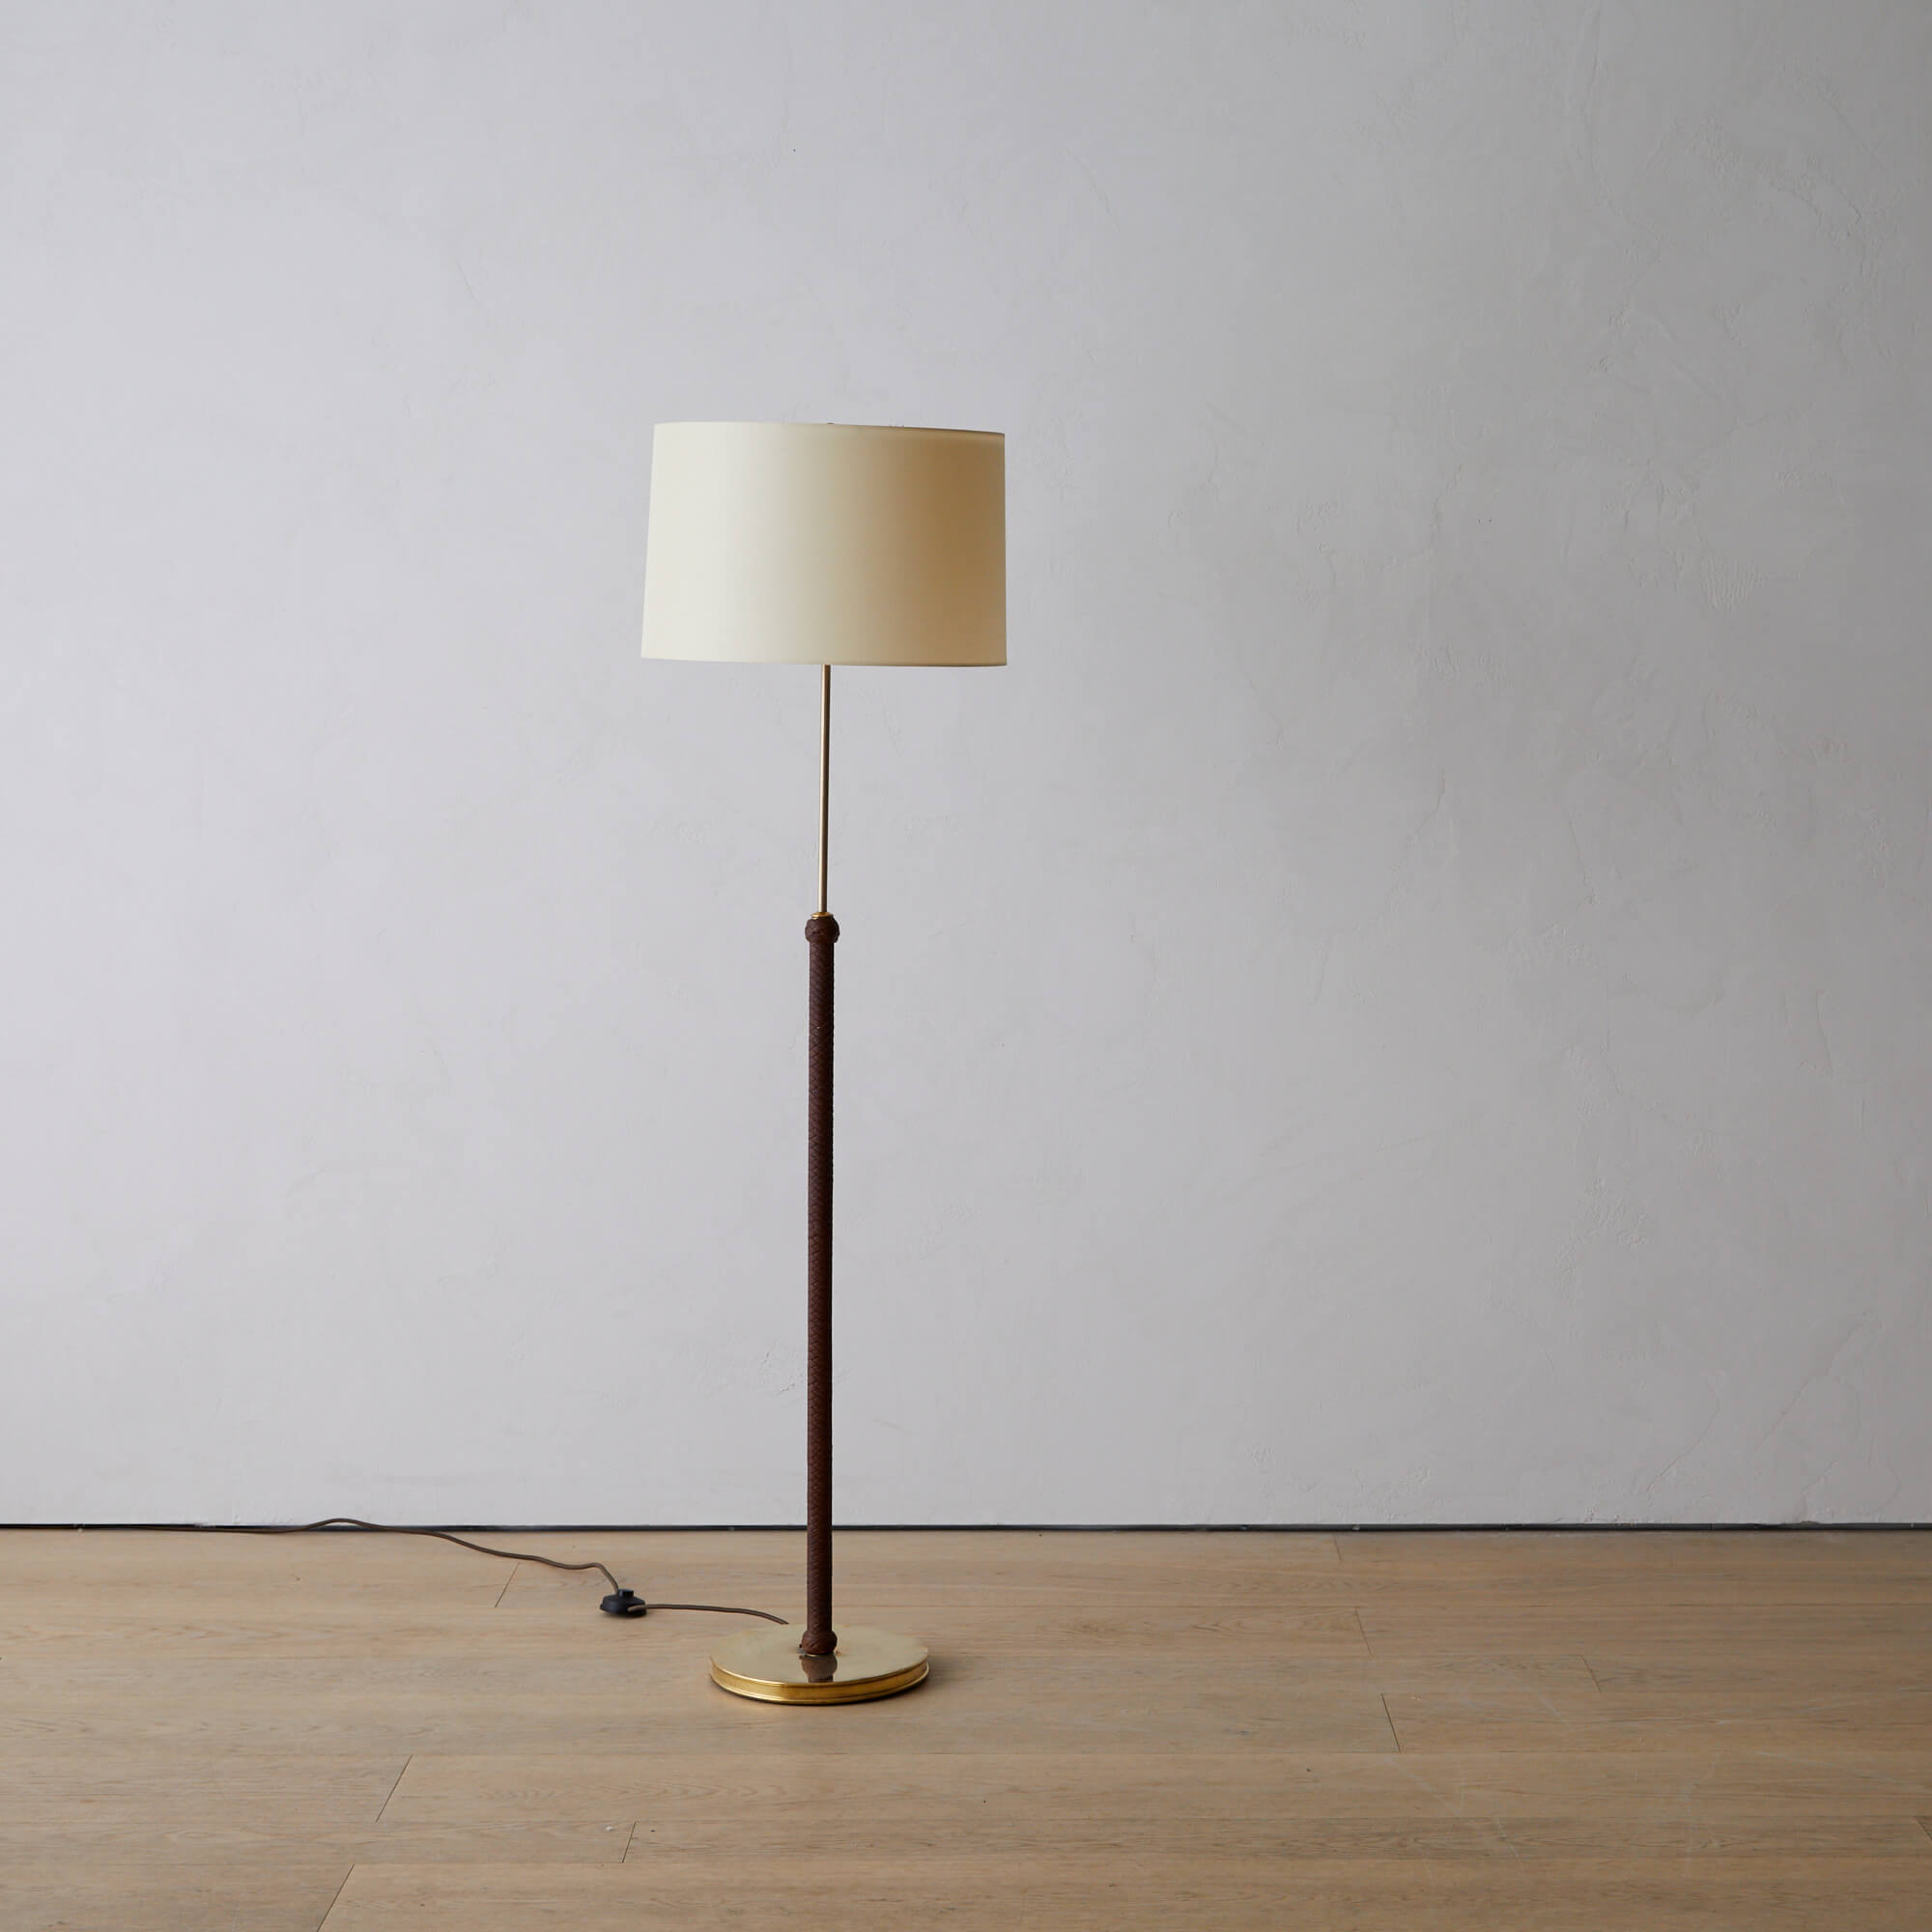 Josef Frank leather-wrapped floor lamp